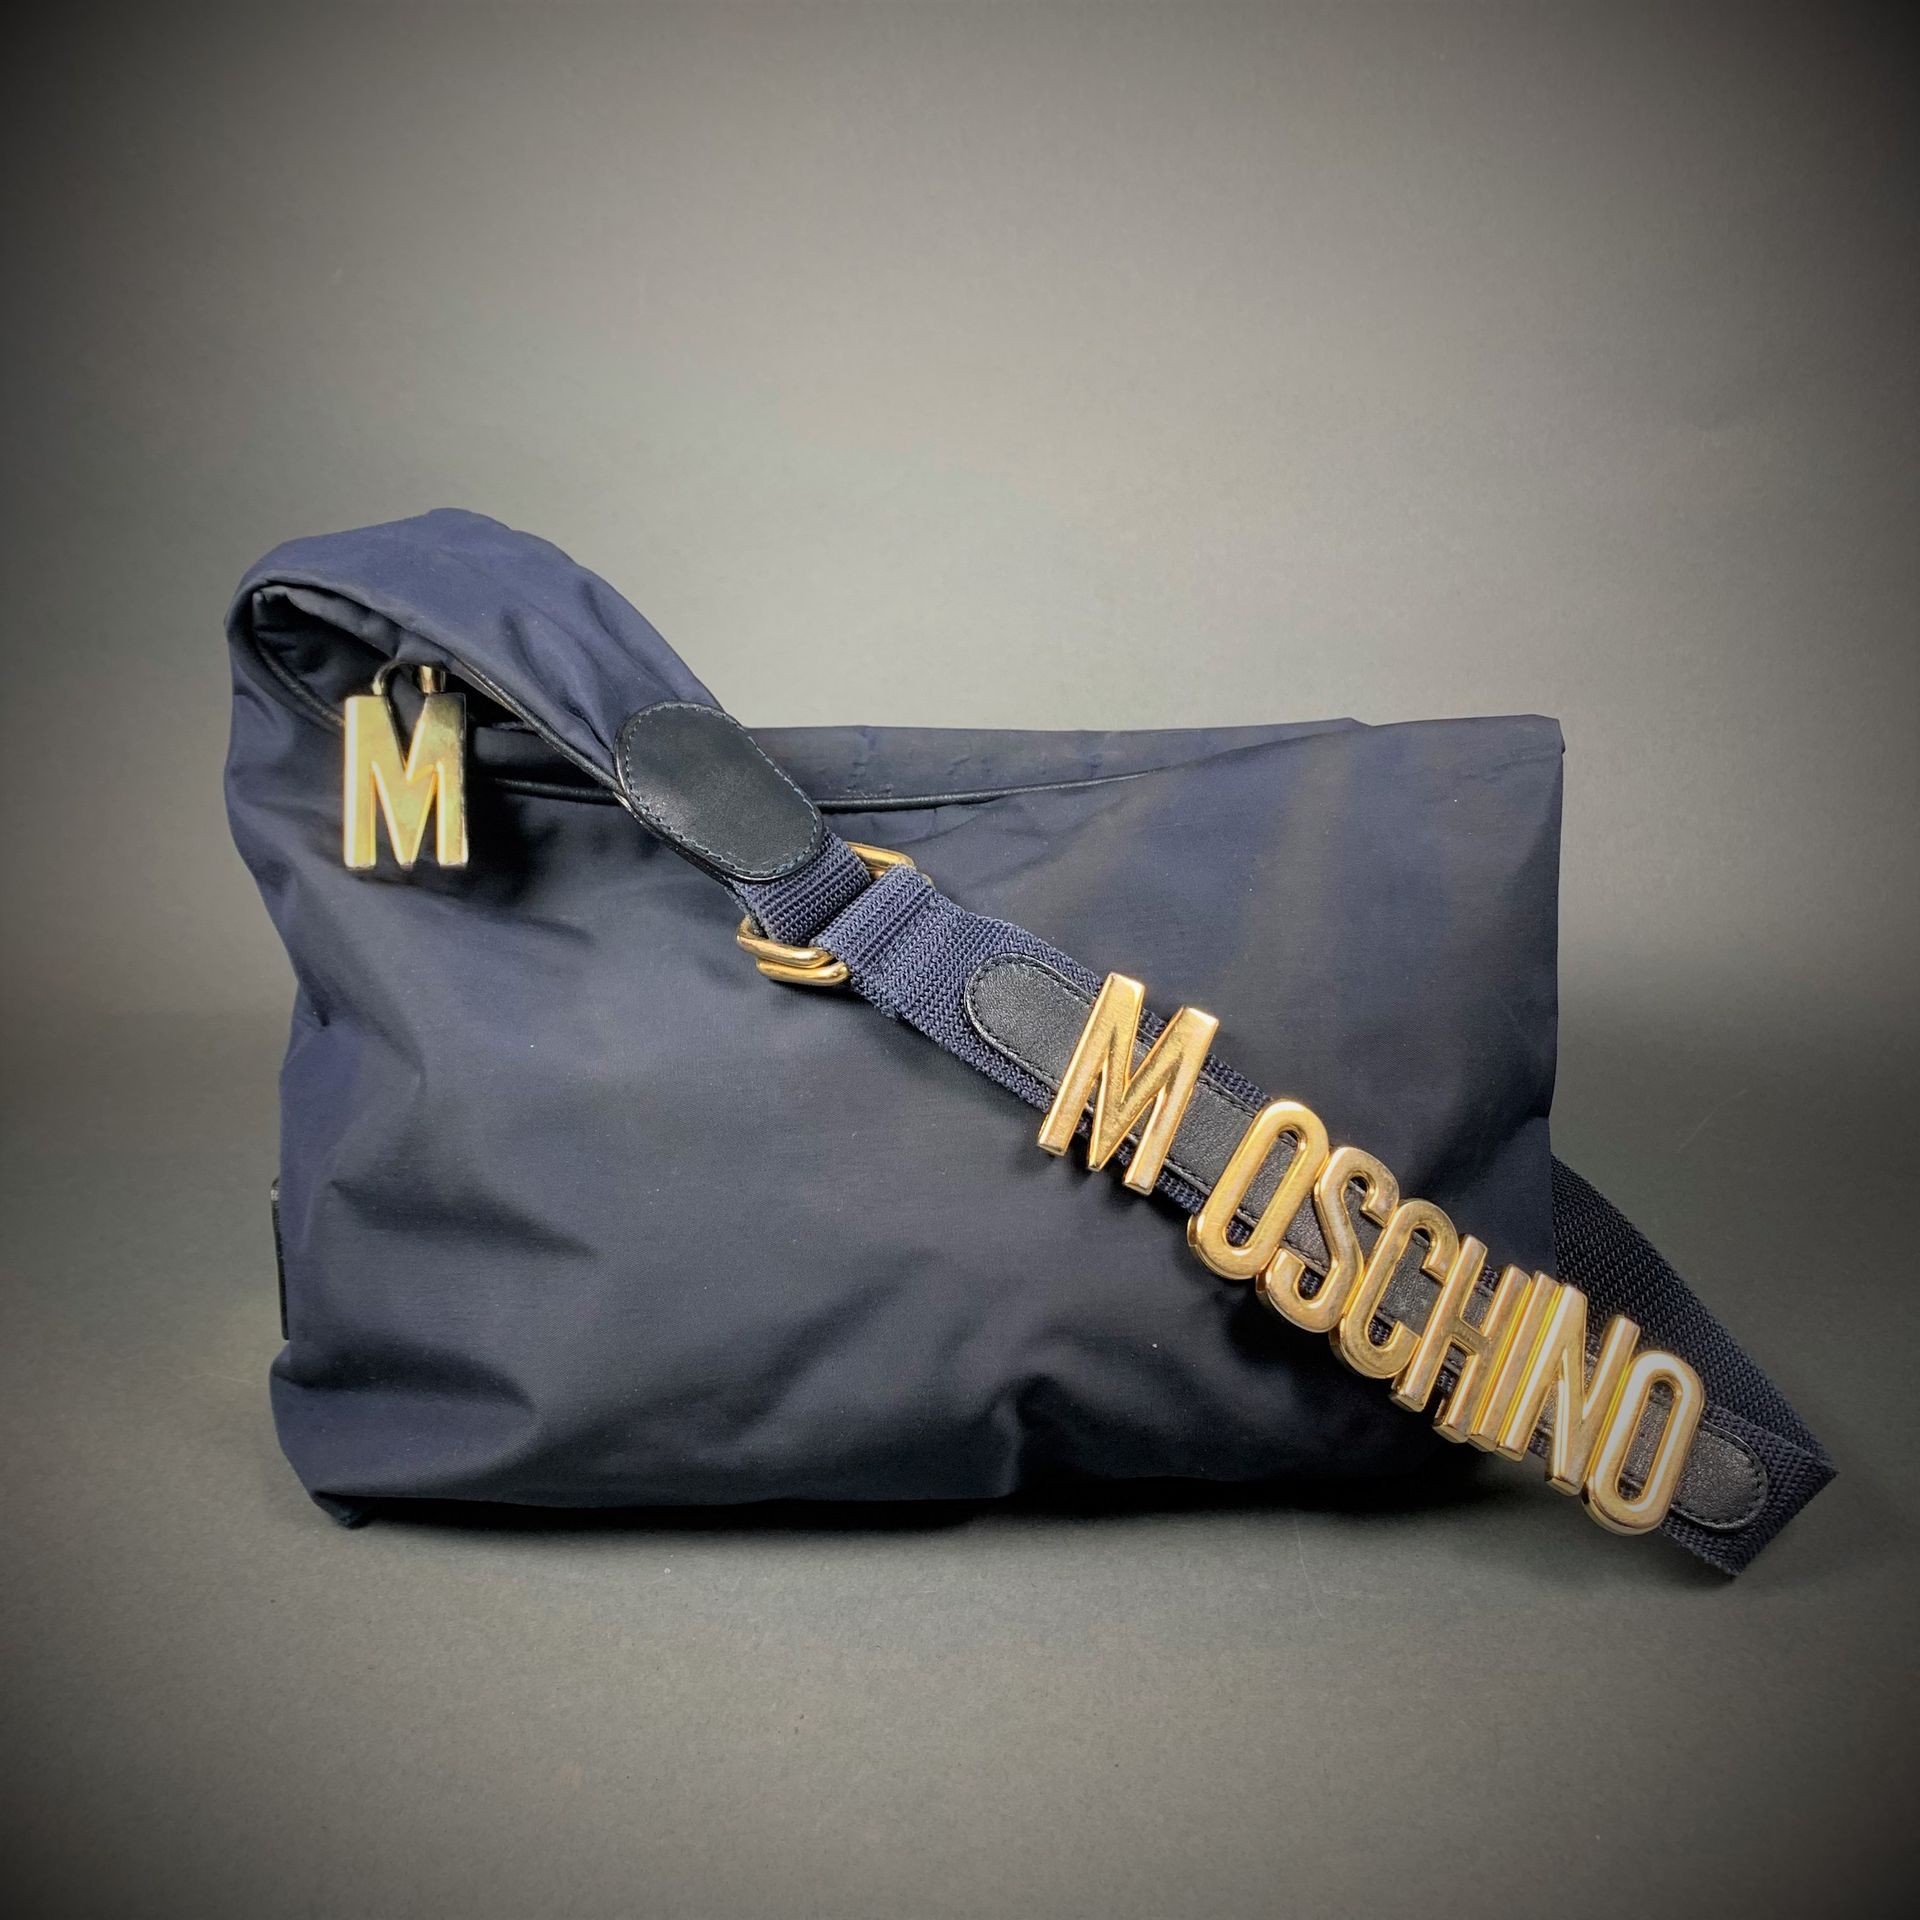 Sac MOSCHINO in blue canvas, gold metal trim, opens with a zipper revealing a bl&hellip;